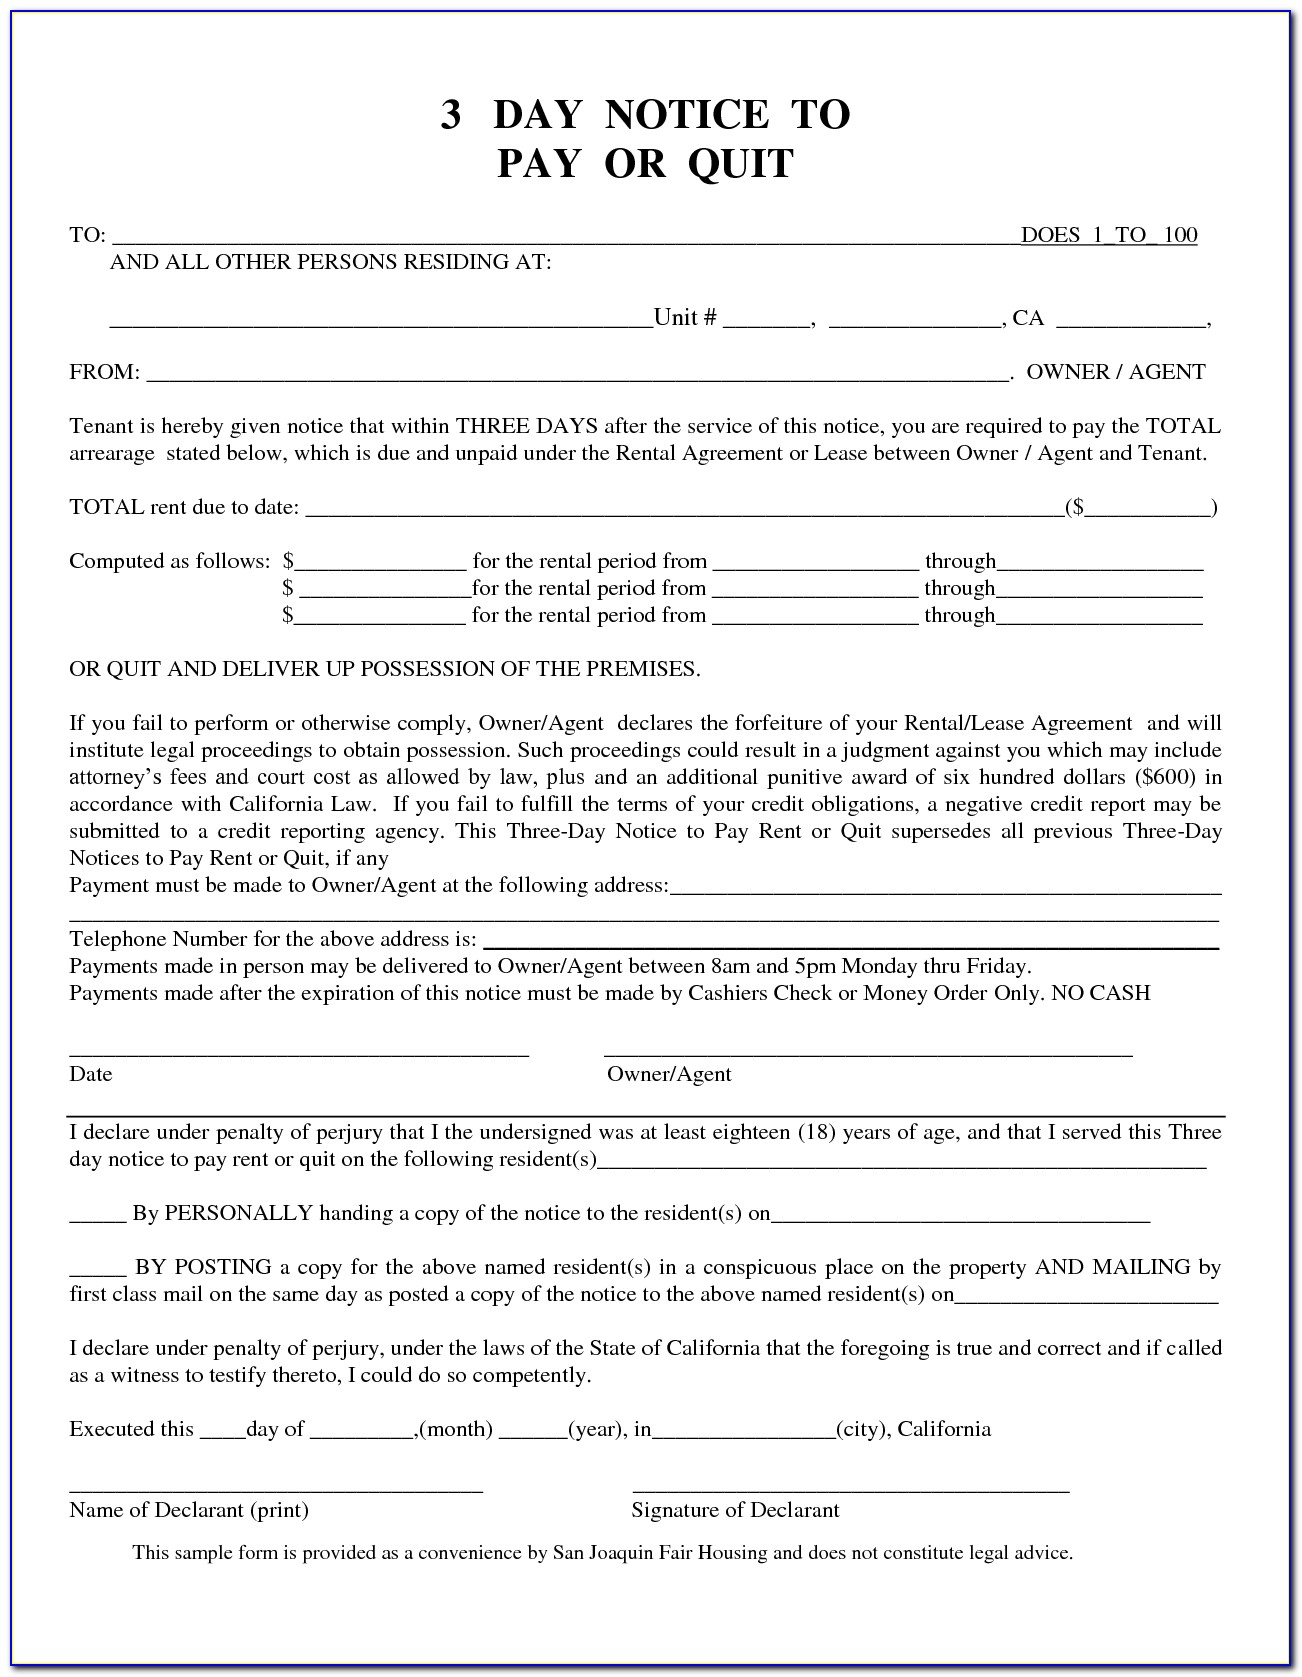 3 Day Pay Or Quit Notice Form California